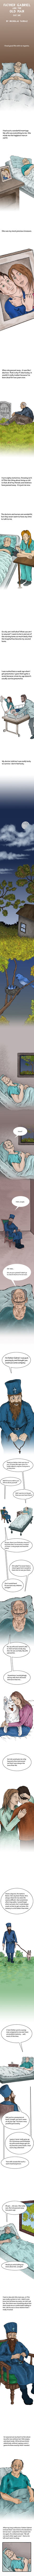 Father Gabriel and the Old Man (Part 1) Comic by Nicholas Tamraz